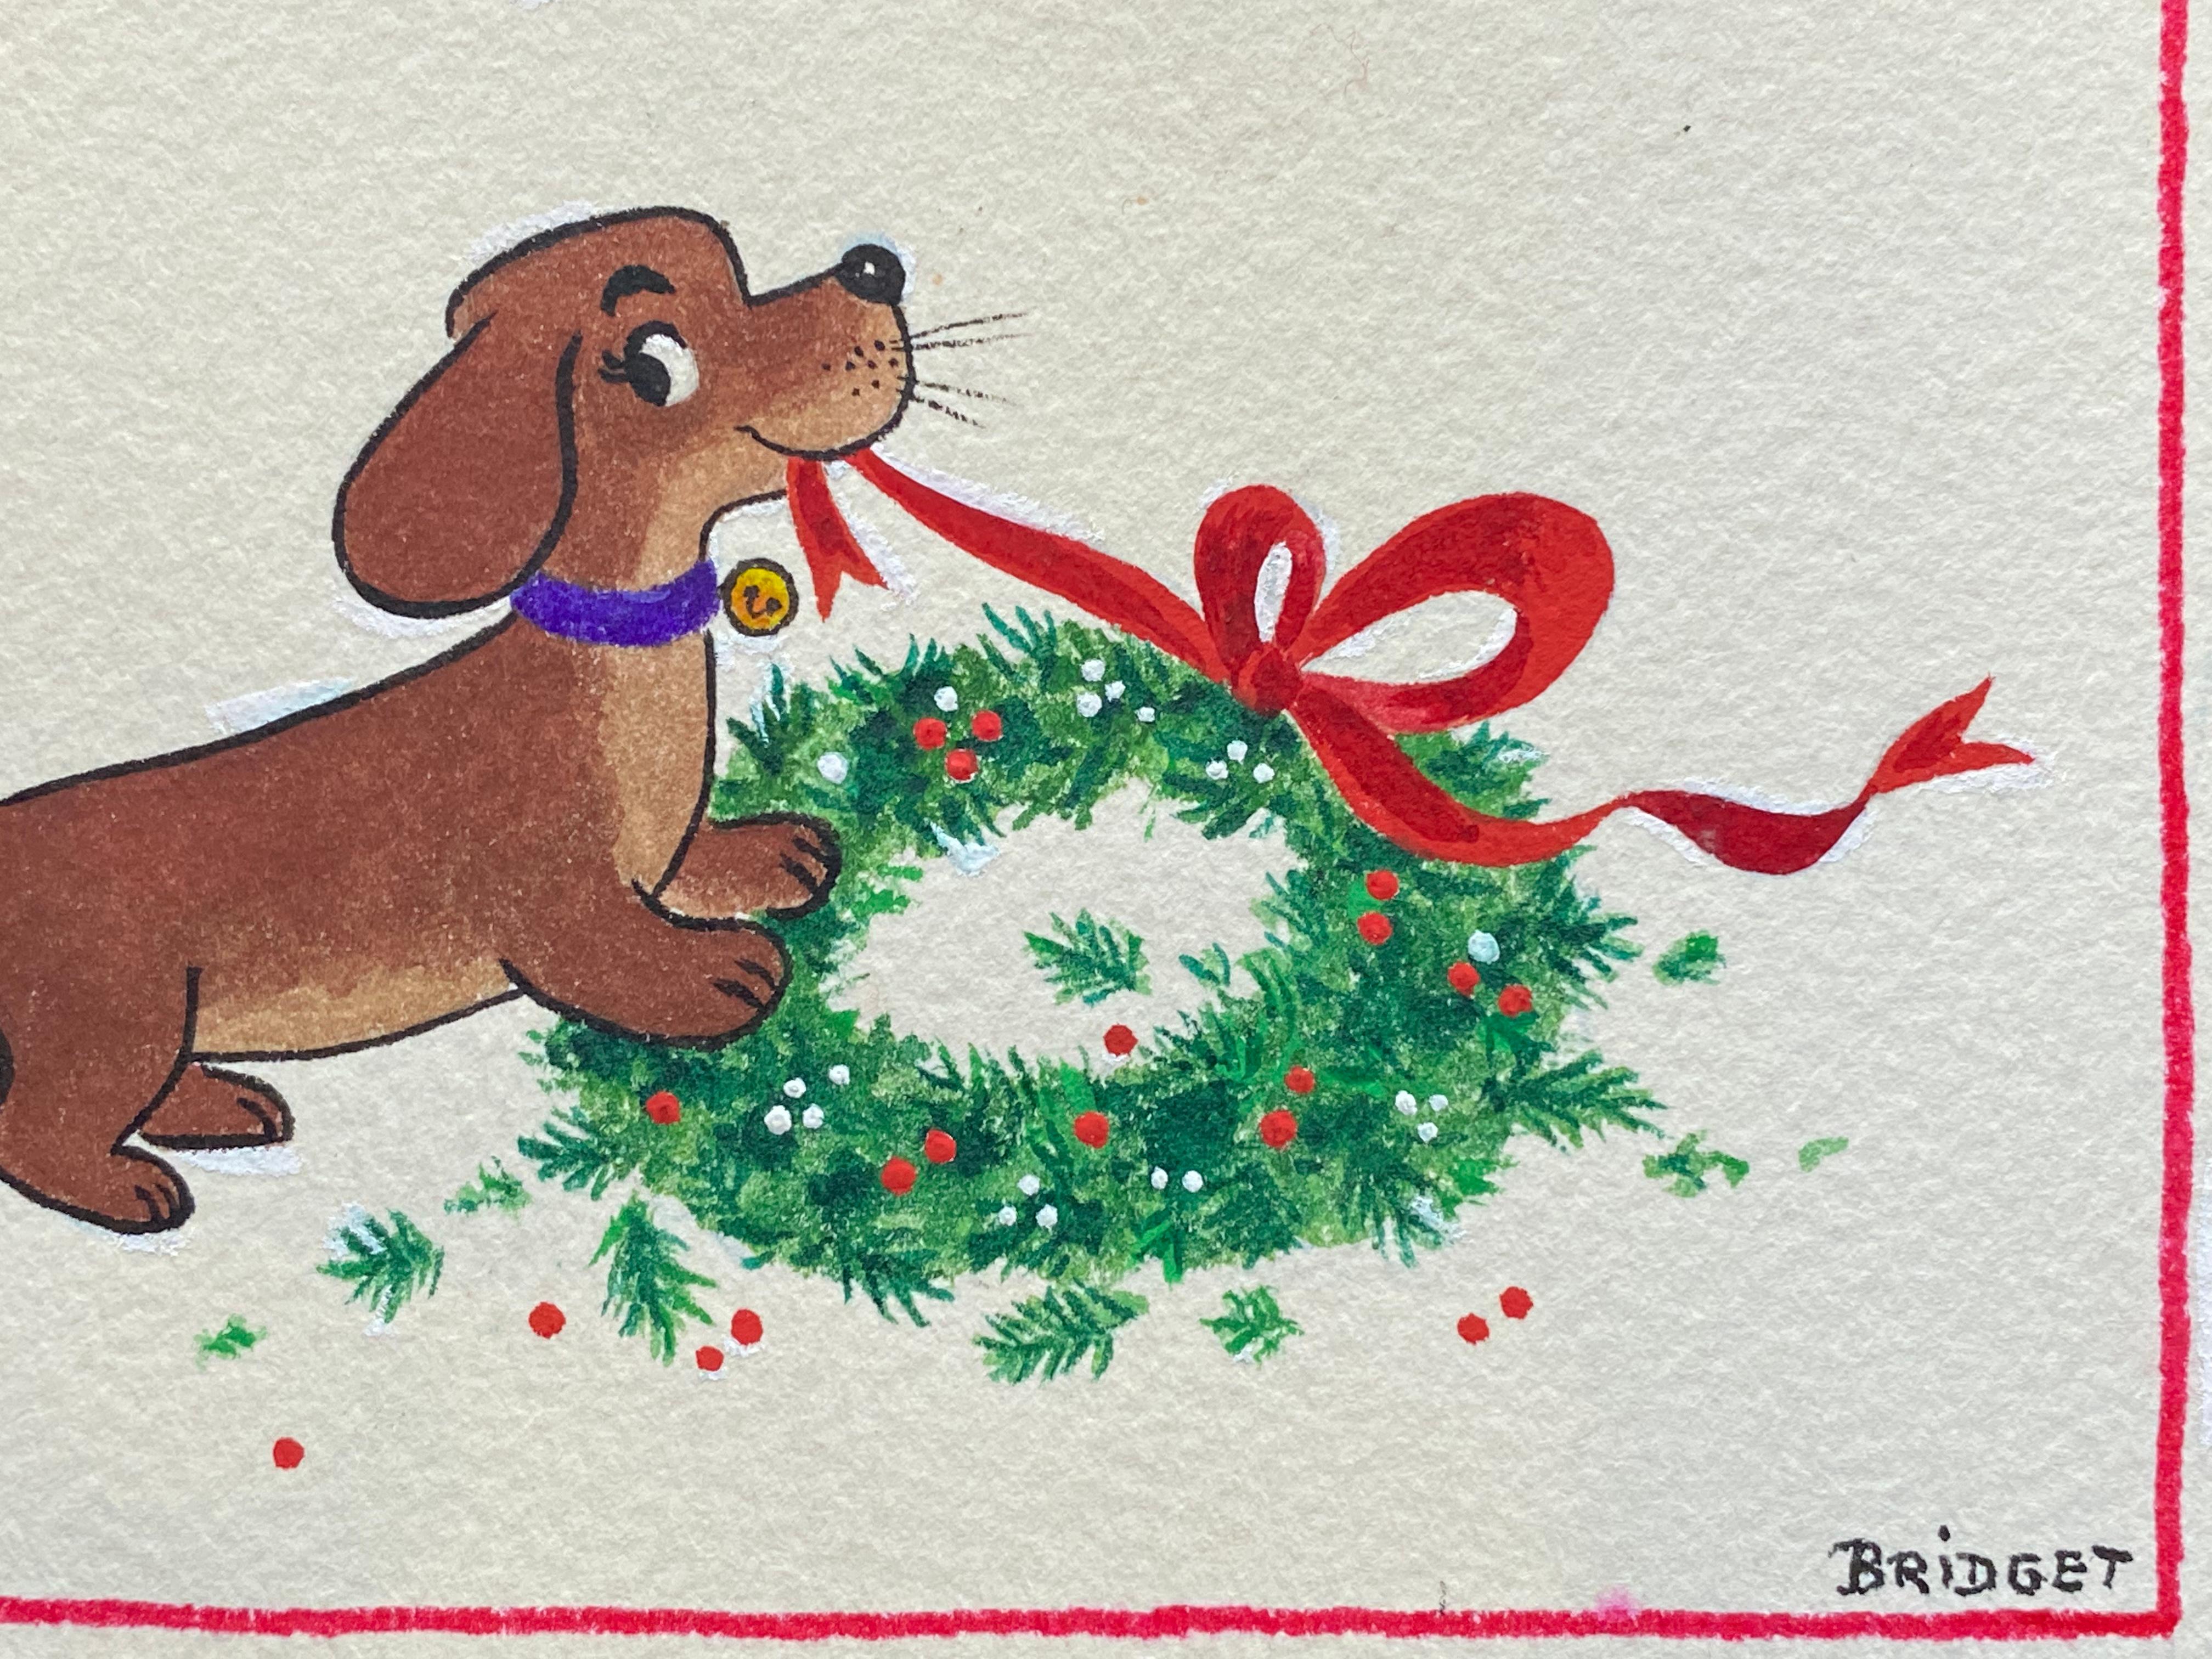 “Puppy with Christmas Wreath” - Other Art Style Art by Unknown